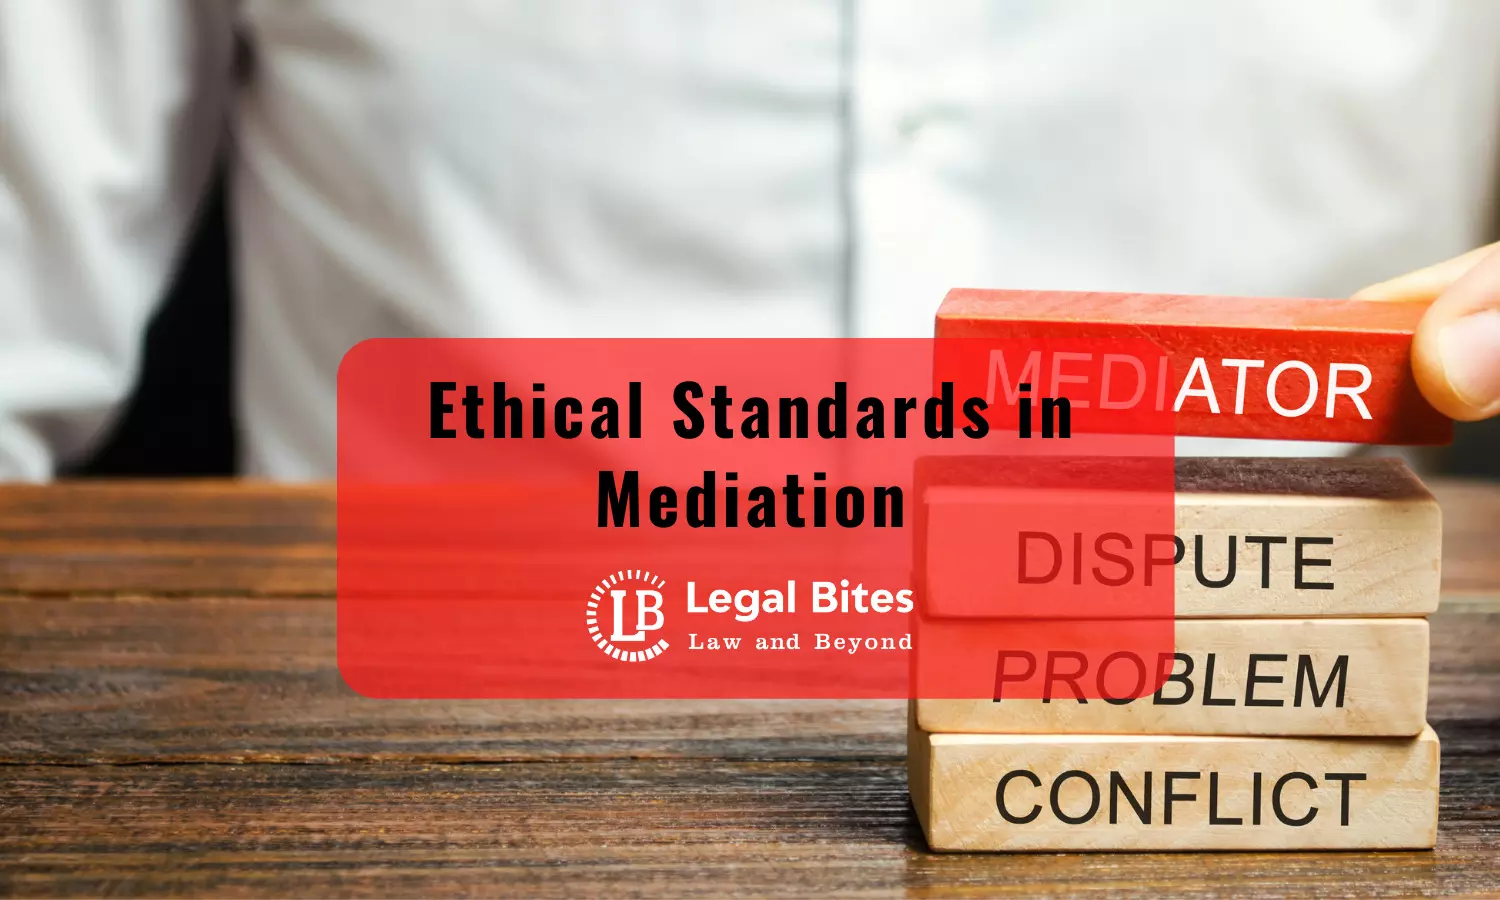 Ethical Standards in Mediation